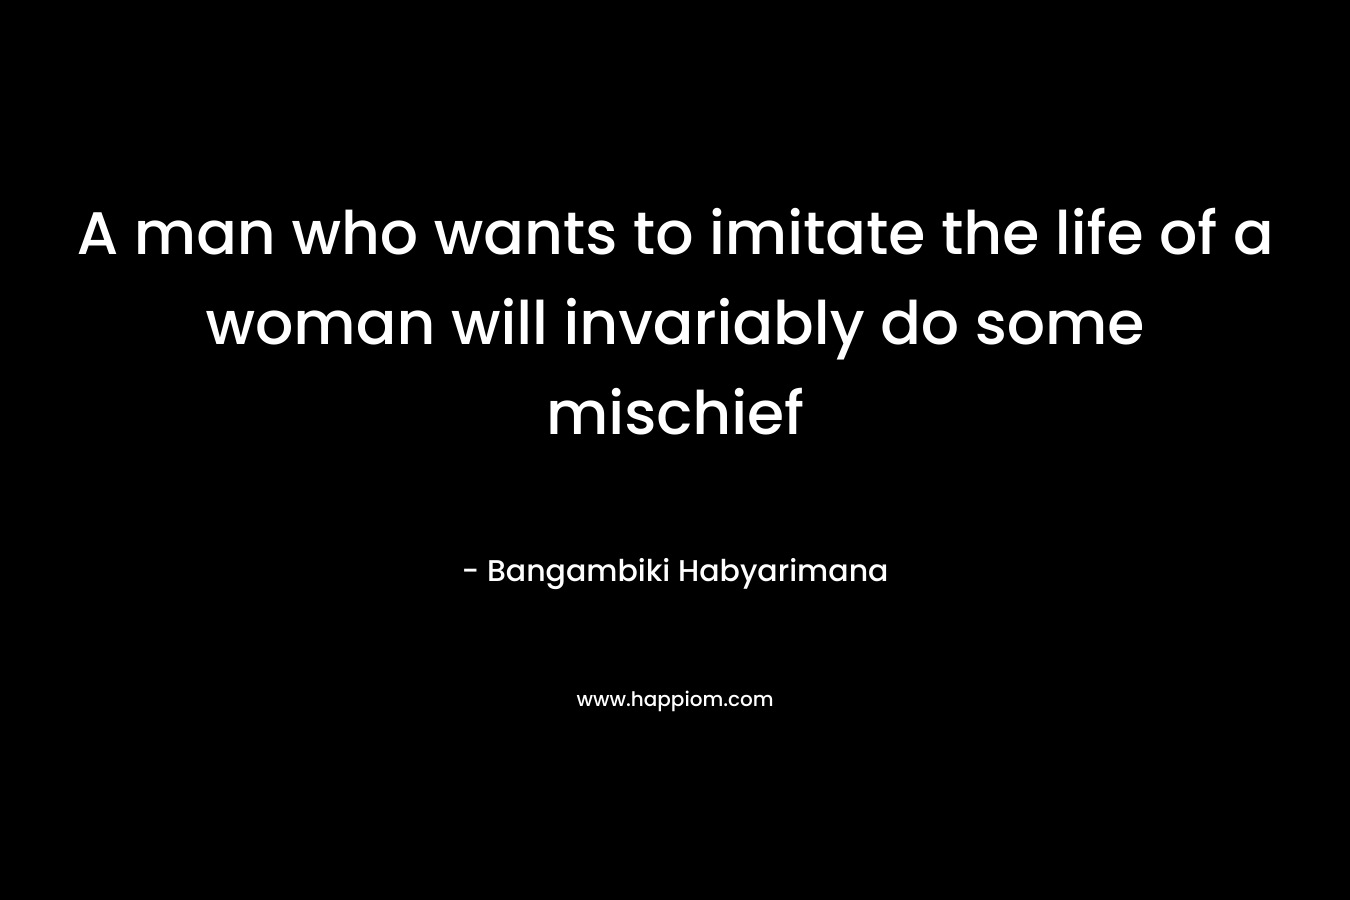 A man who wants to imitate the life of a woman will invariably do some mischief